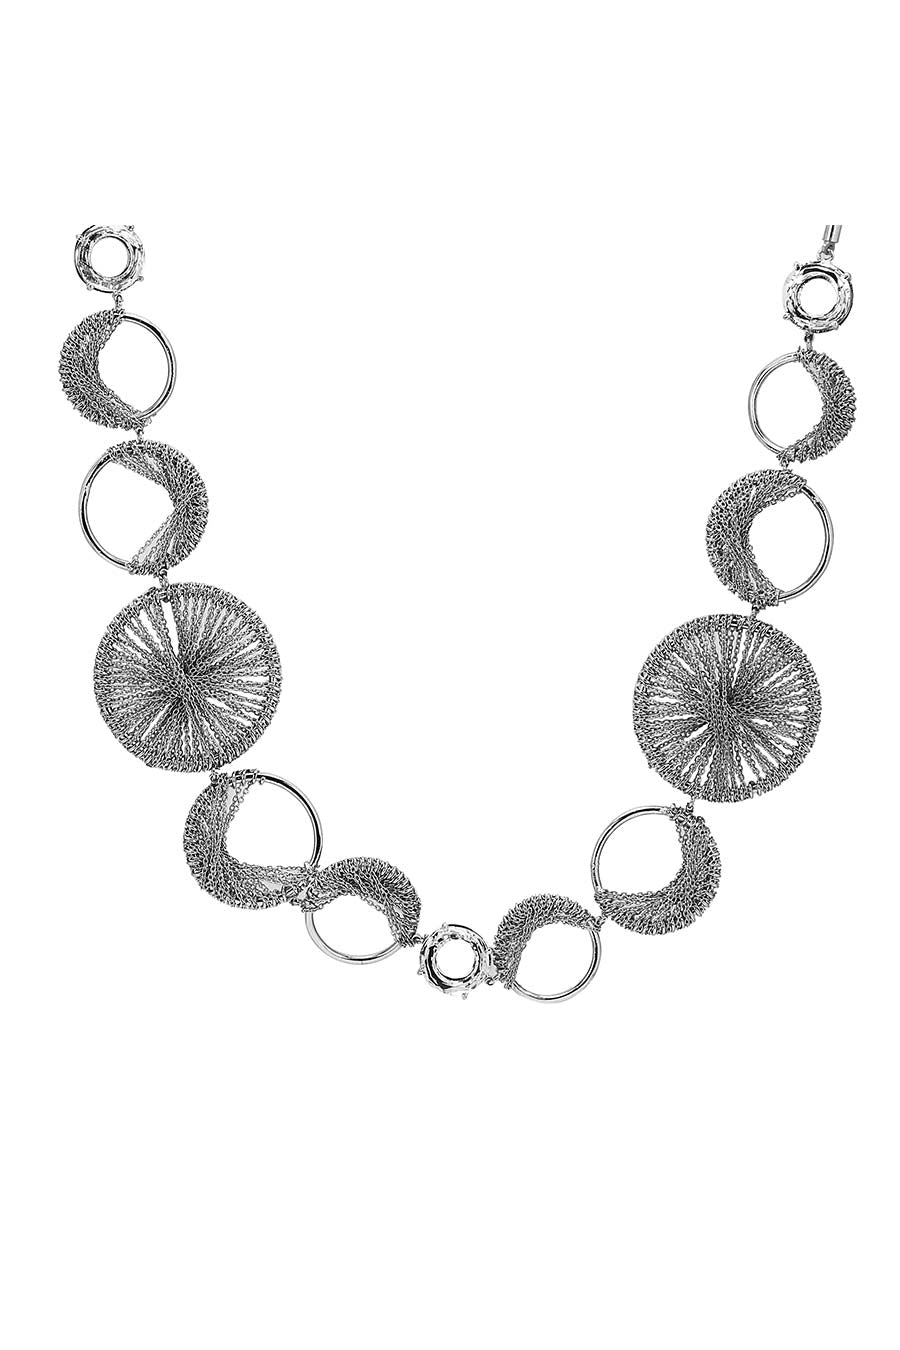 Sash Silver Plated Necklace